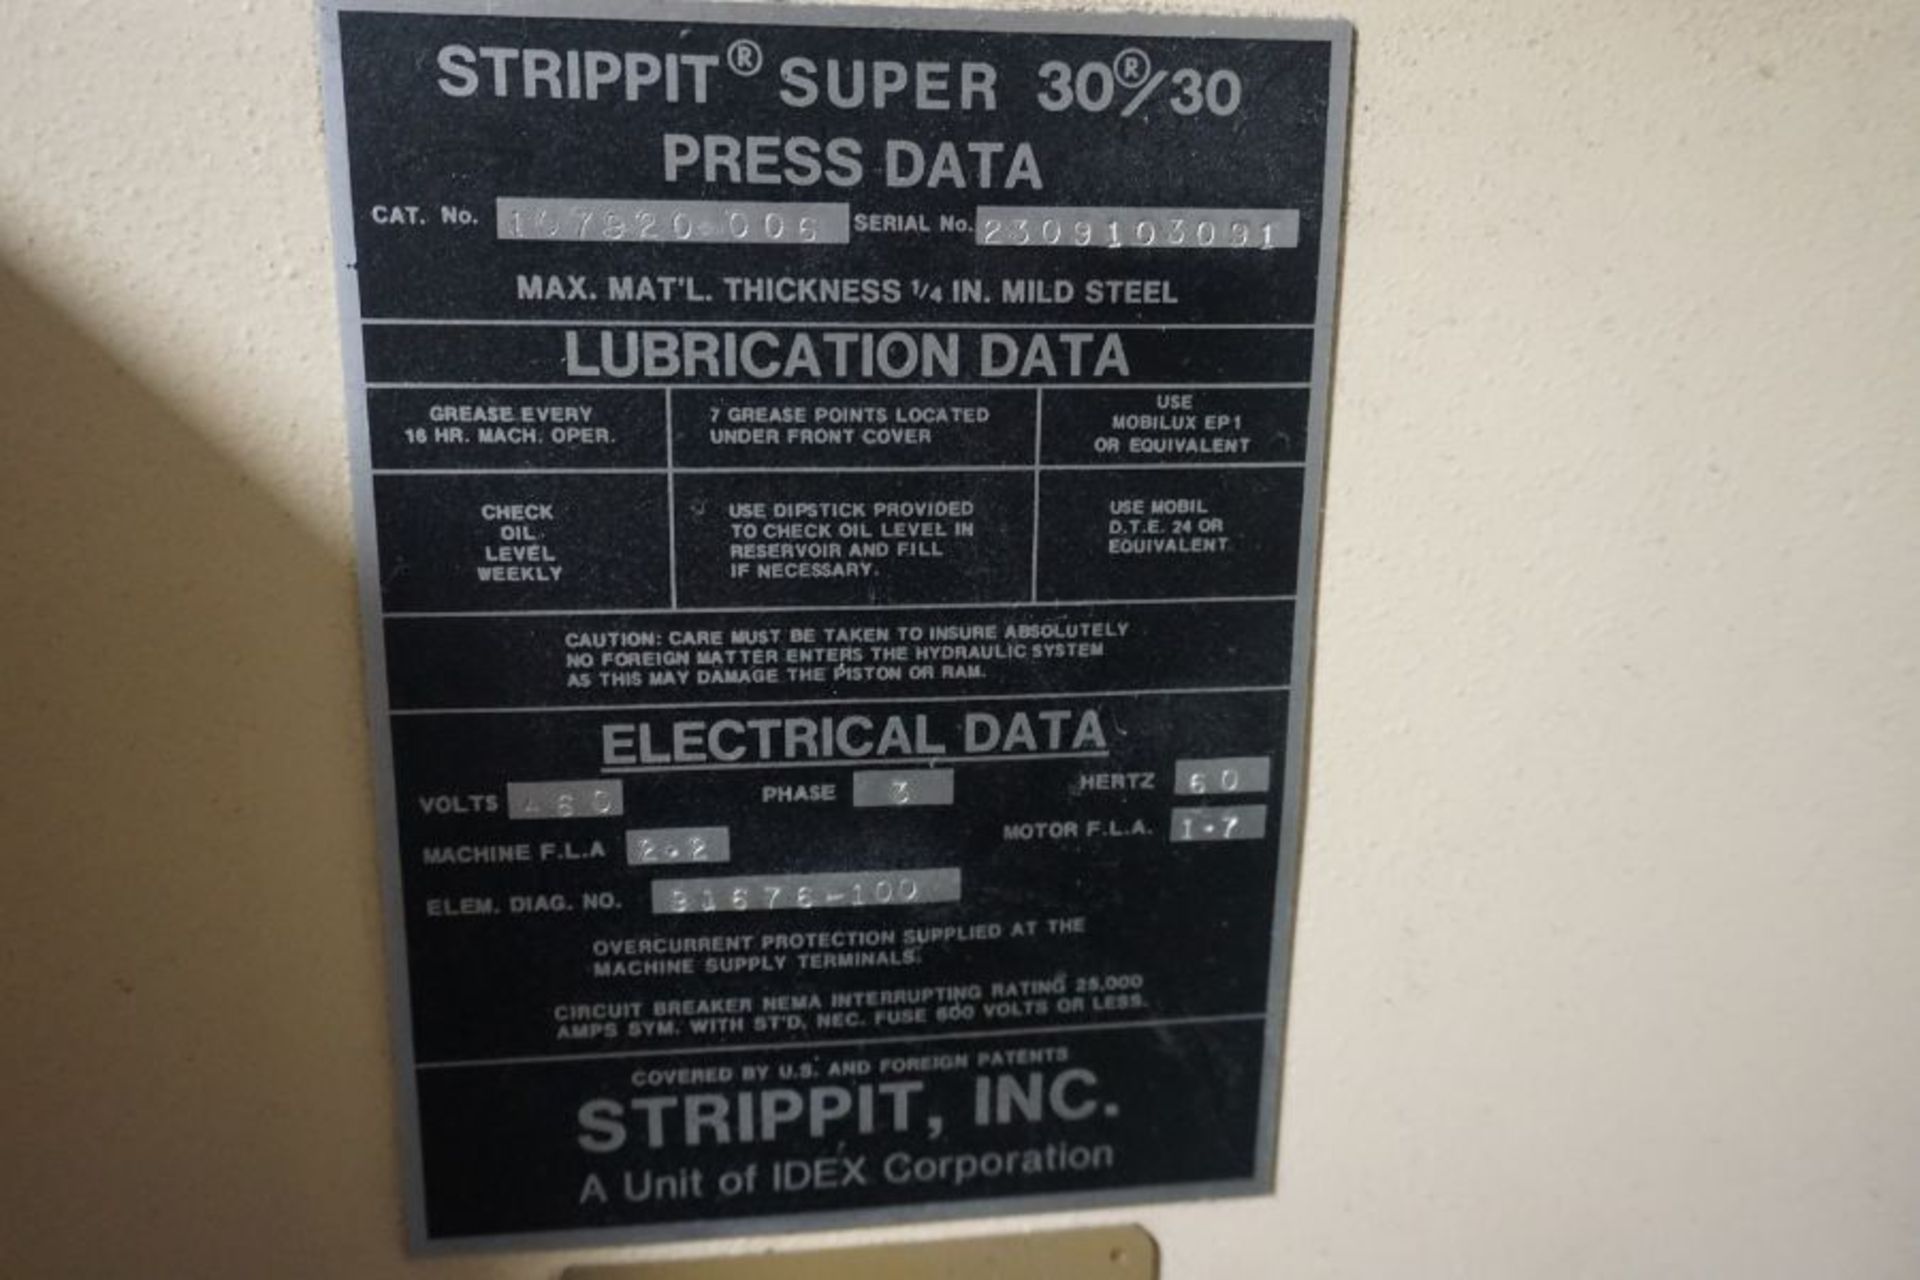 Strippit Super AG 30/30 Punch, Max Thickness 1/4" Mild Steel, s/n 2309103091 - Image 4 of 4